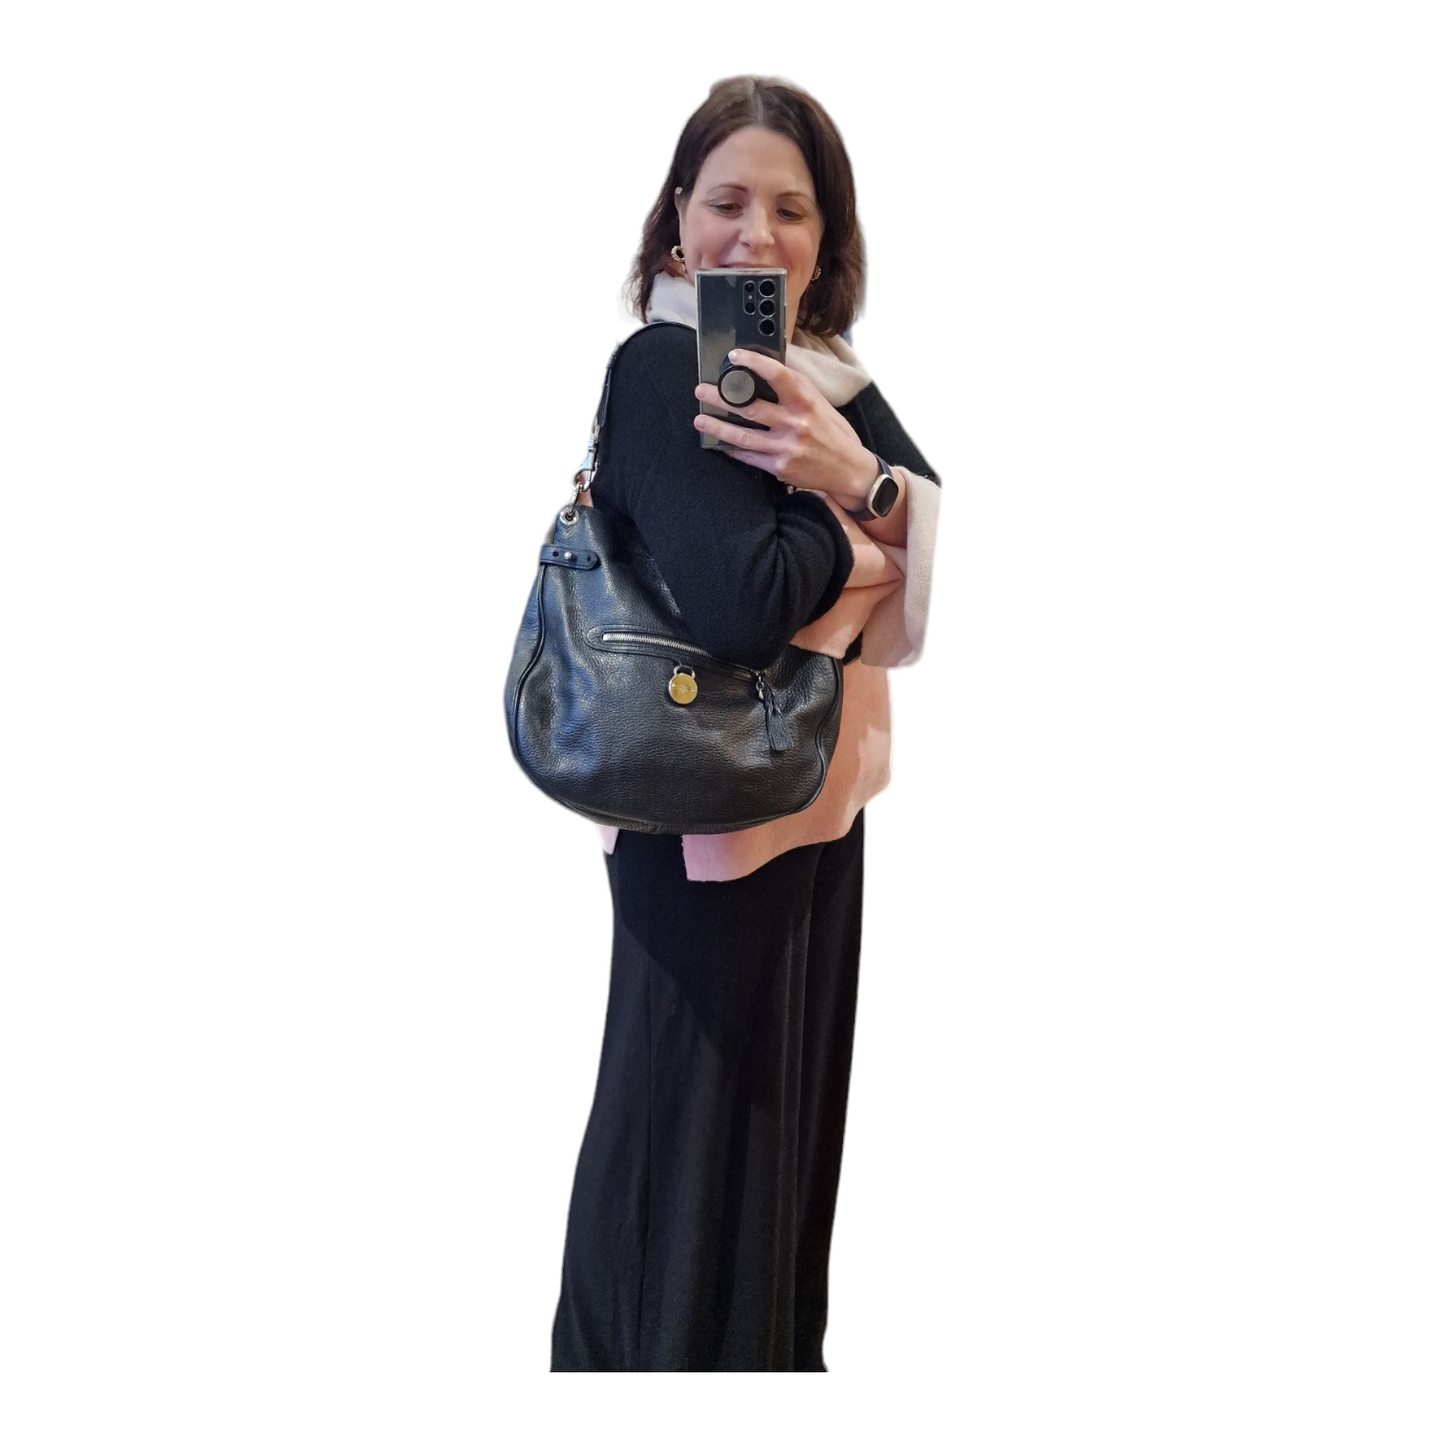 Mulberry Somerset, Black tote